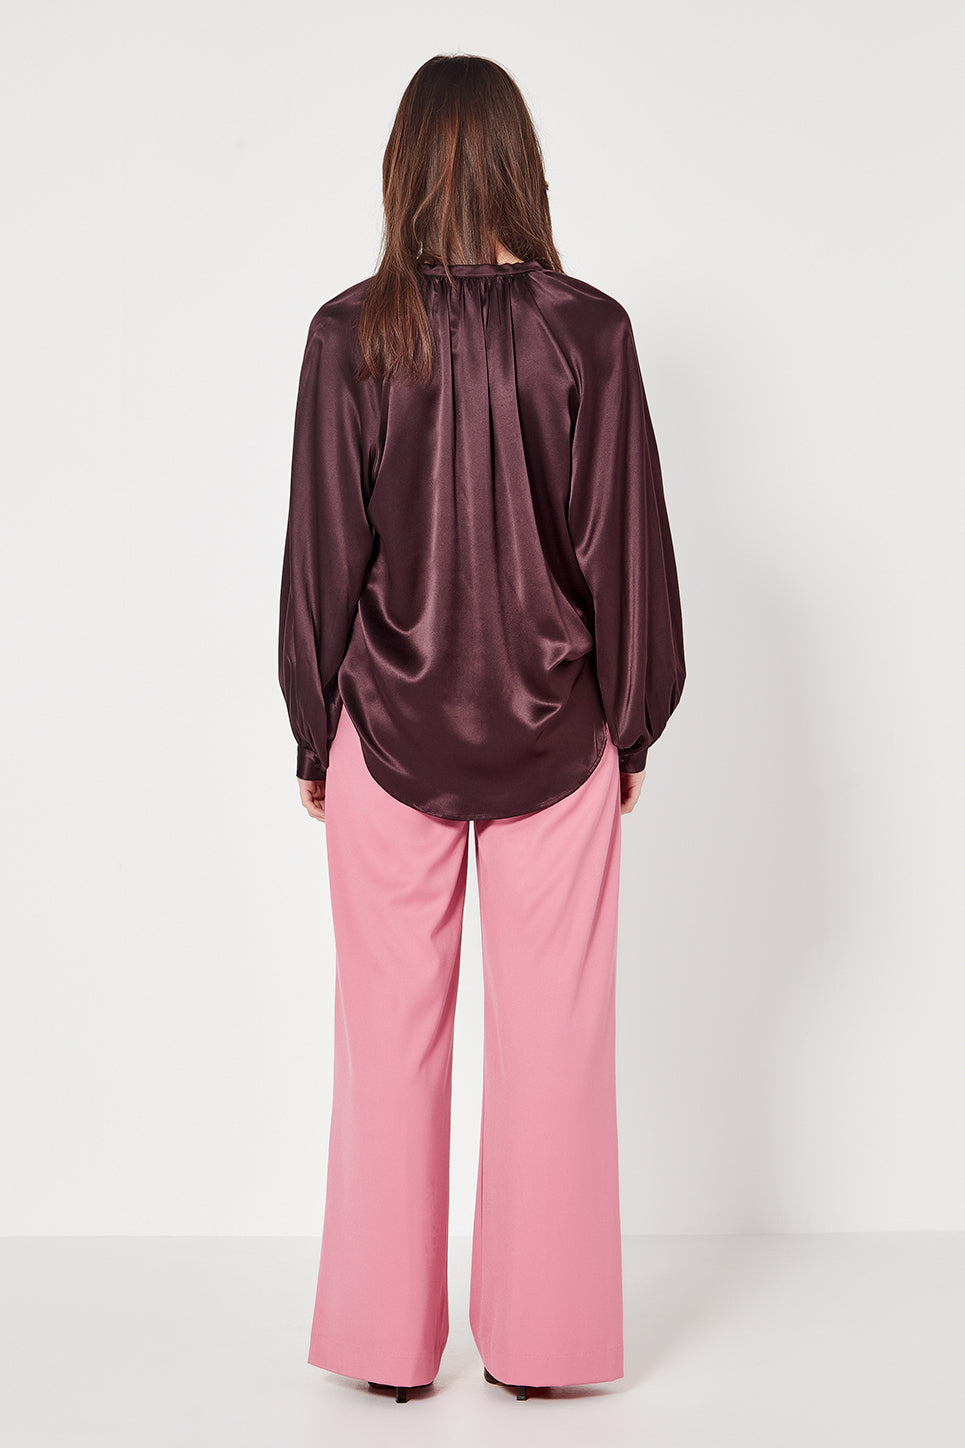 The Matisse Blouse in Bordeaux